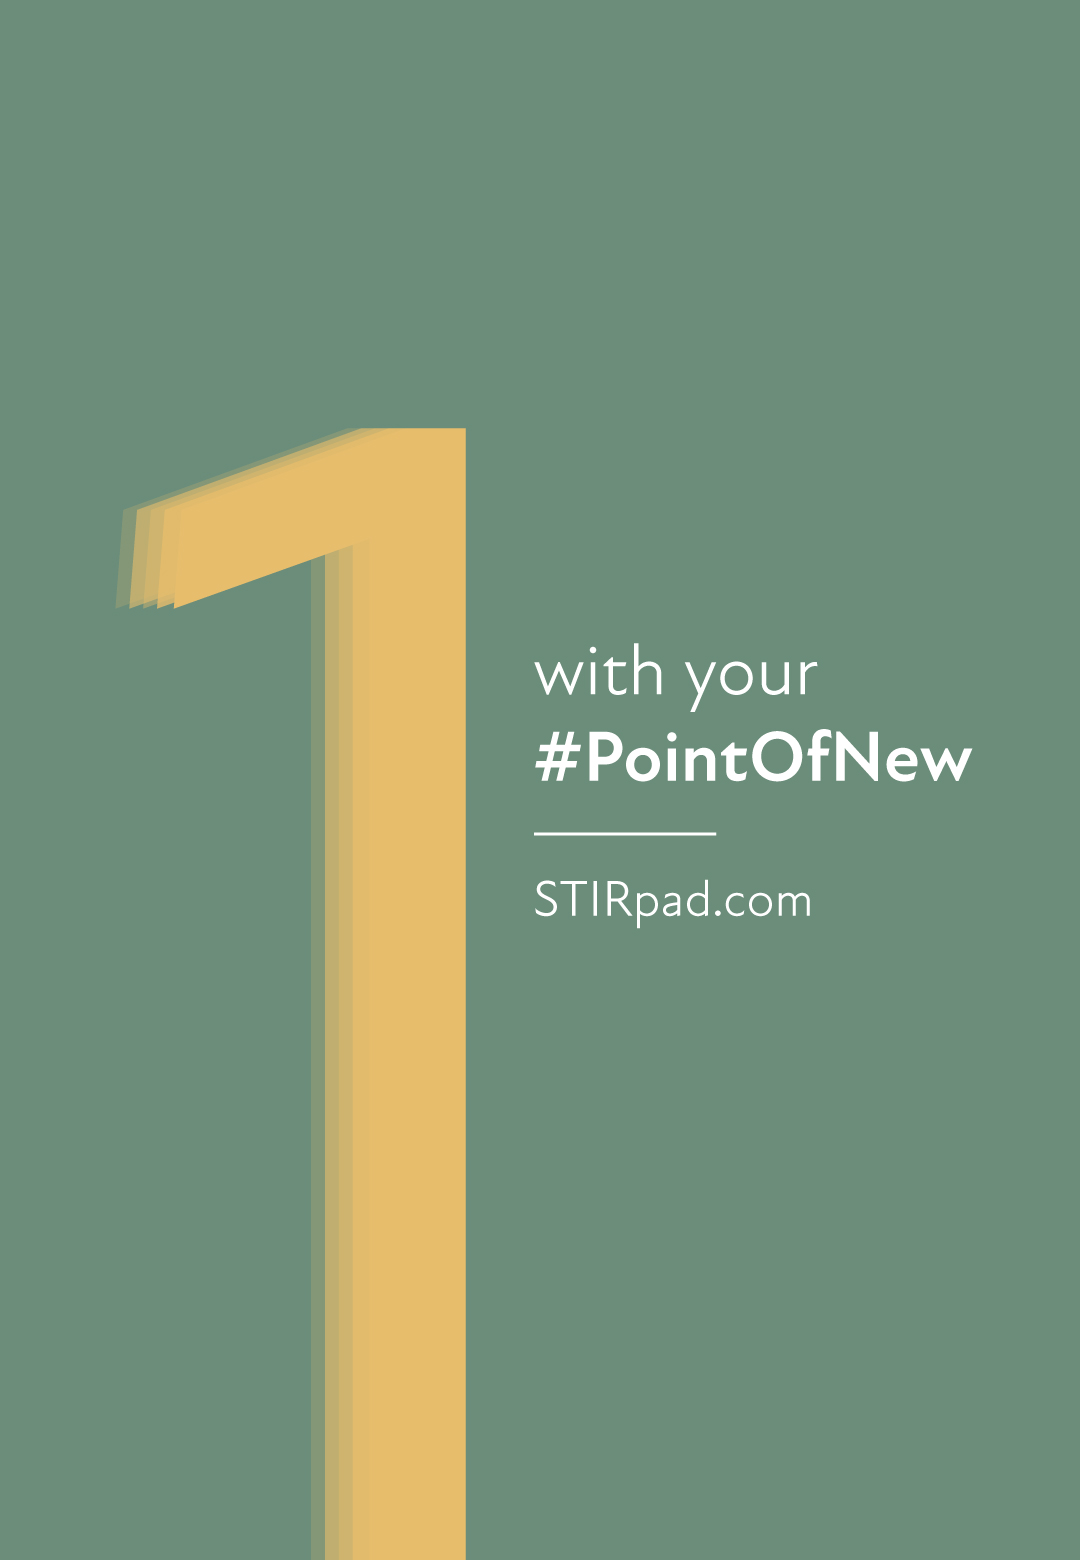 STIRpad is ONE with your #PointofNEW